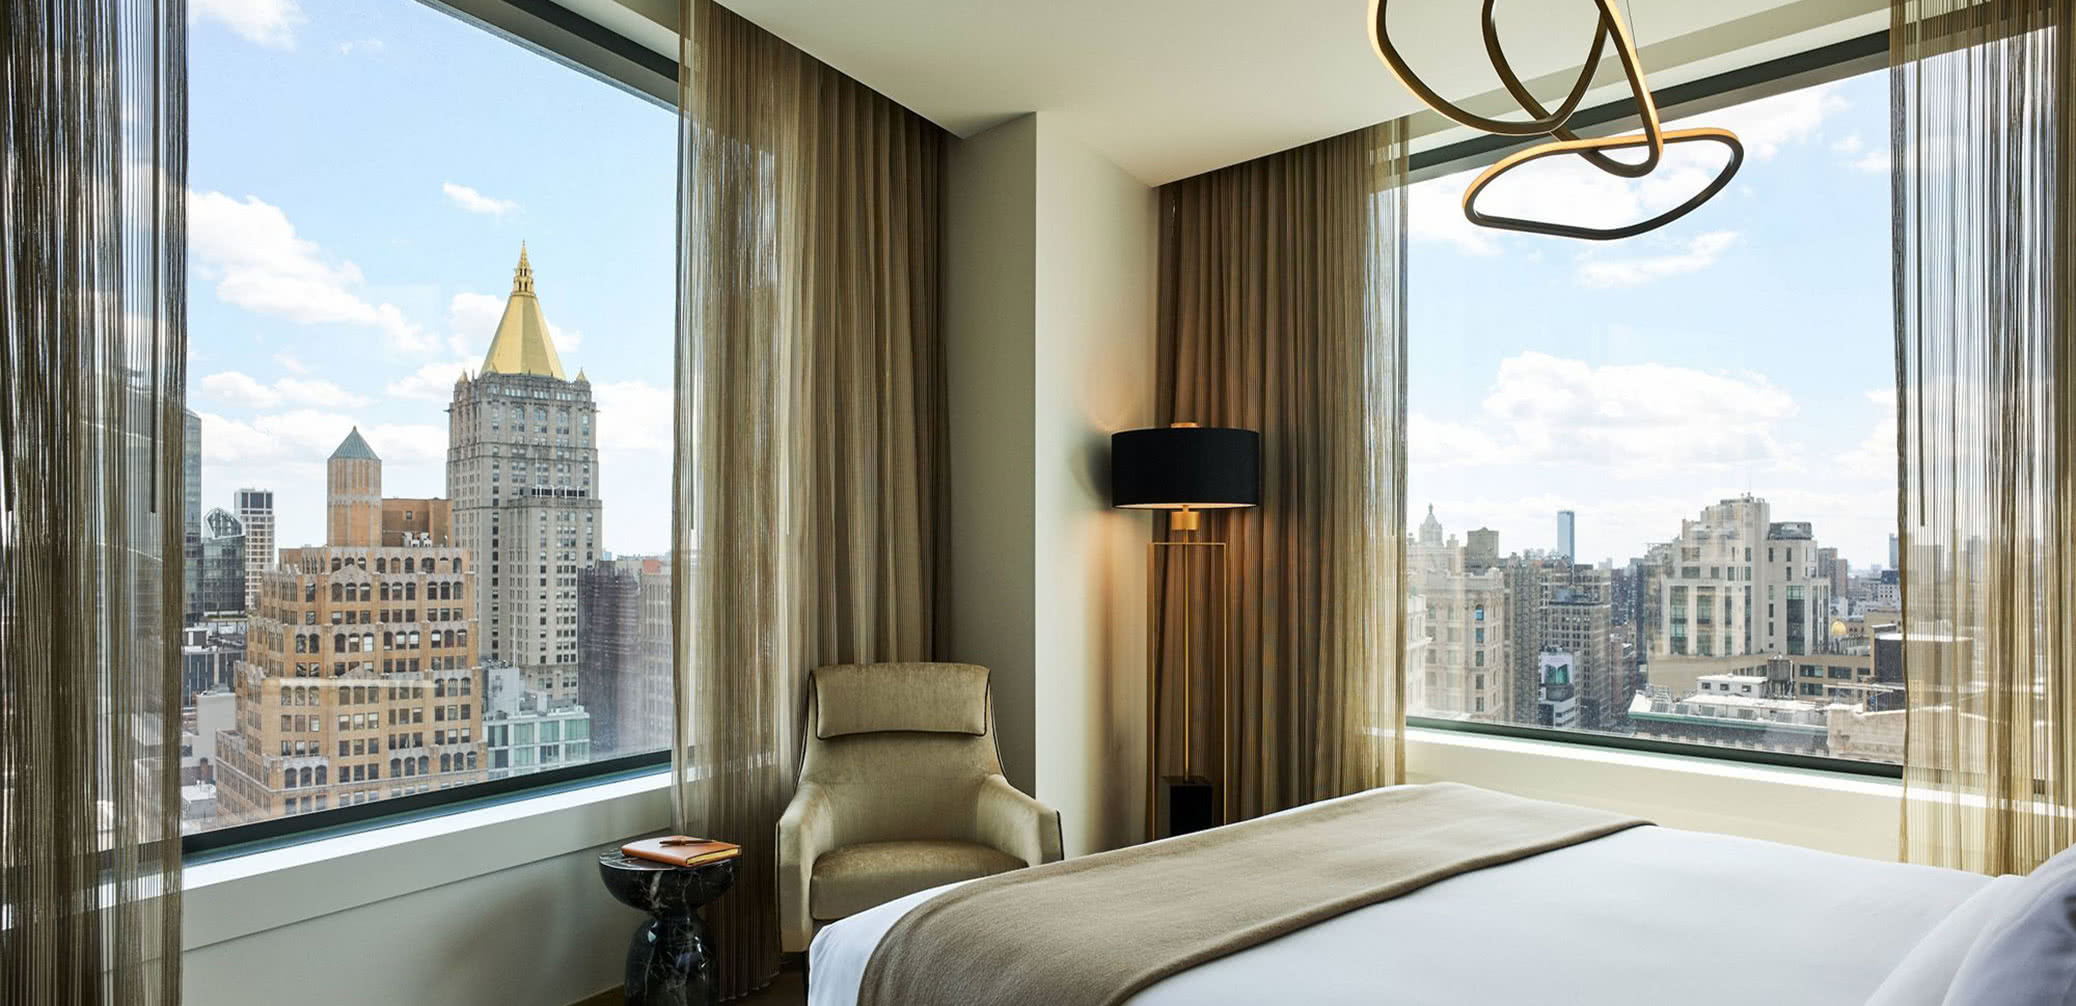 Ritz-Carlton New York Nomad Vs. Central Park. Which Is Best?